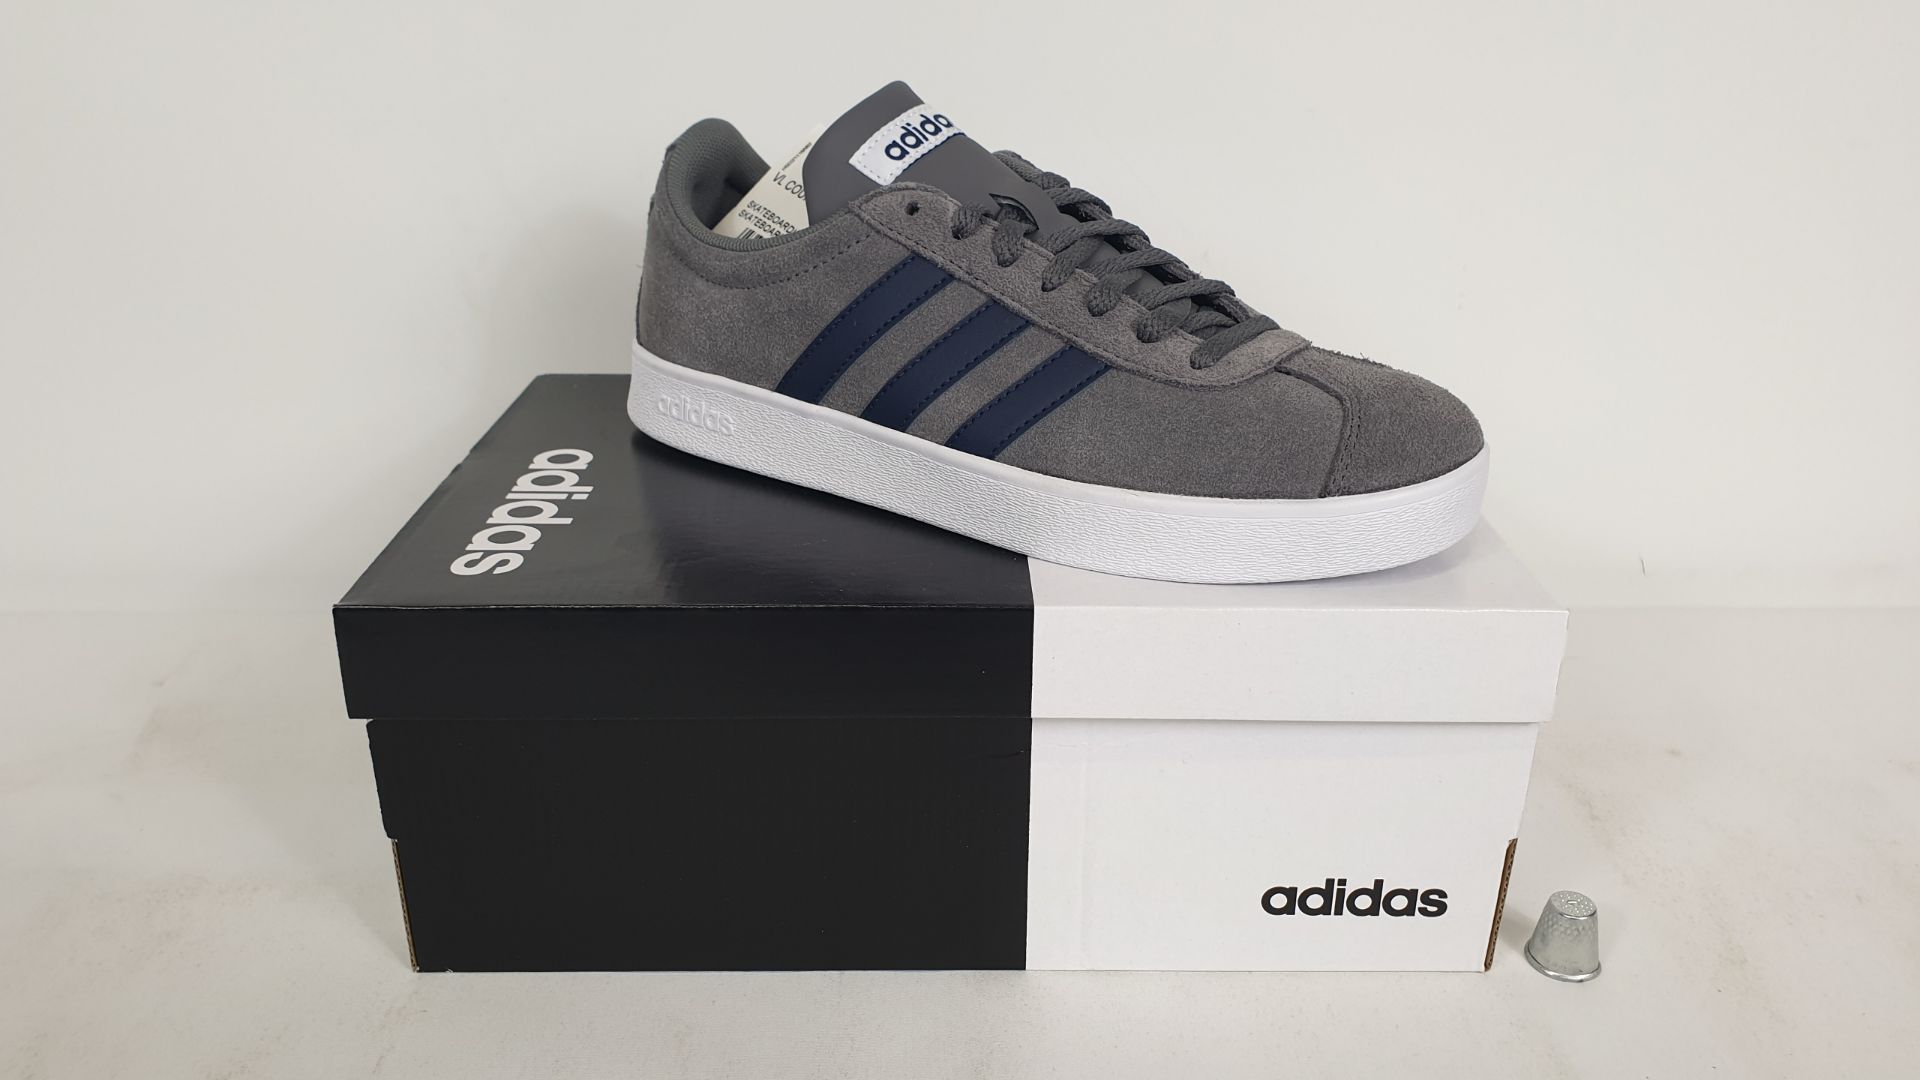 5 X PAIRS OF ADIDAS TRAINERS VL COURT 2.0 GREY W/ NAVY STRIPES SIZE 3.5 - BRAND NEW AND BOXED